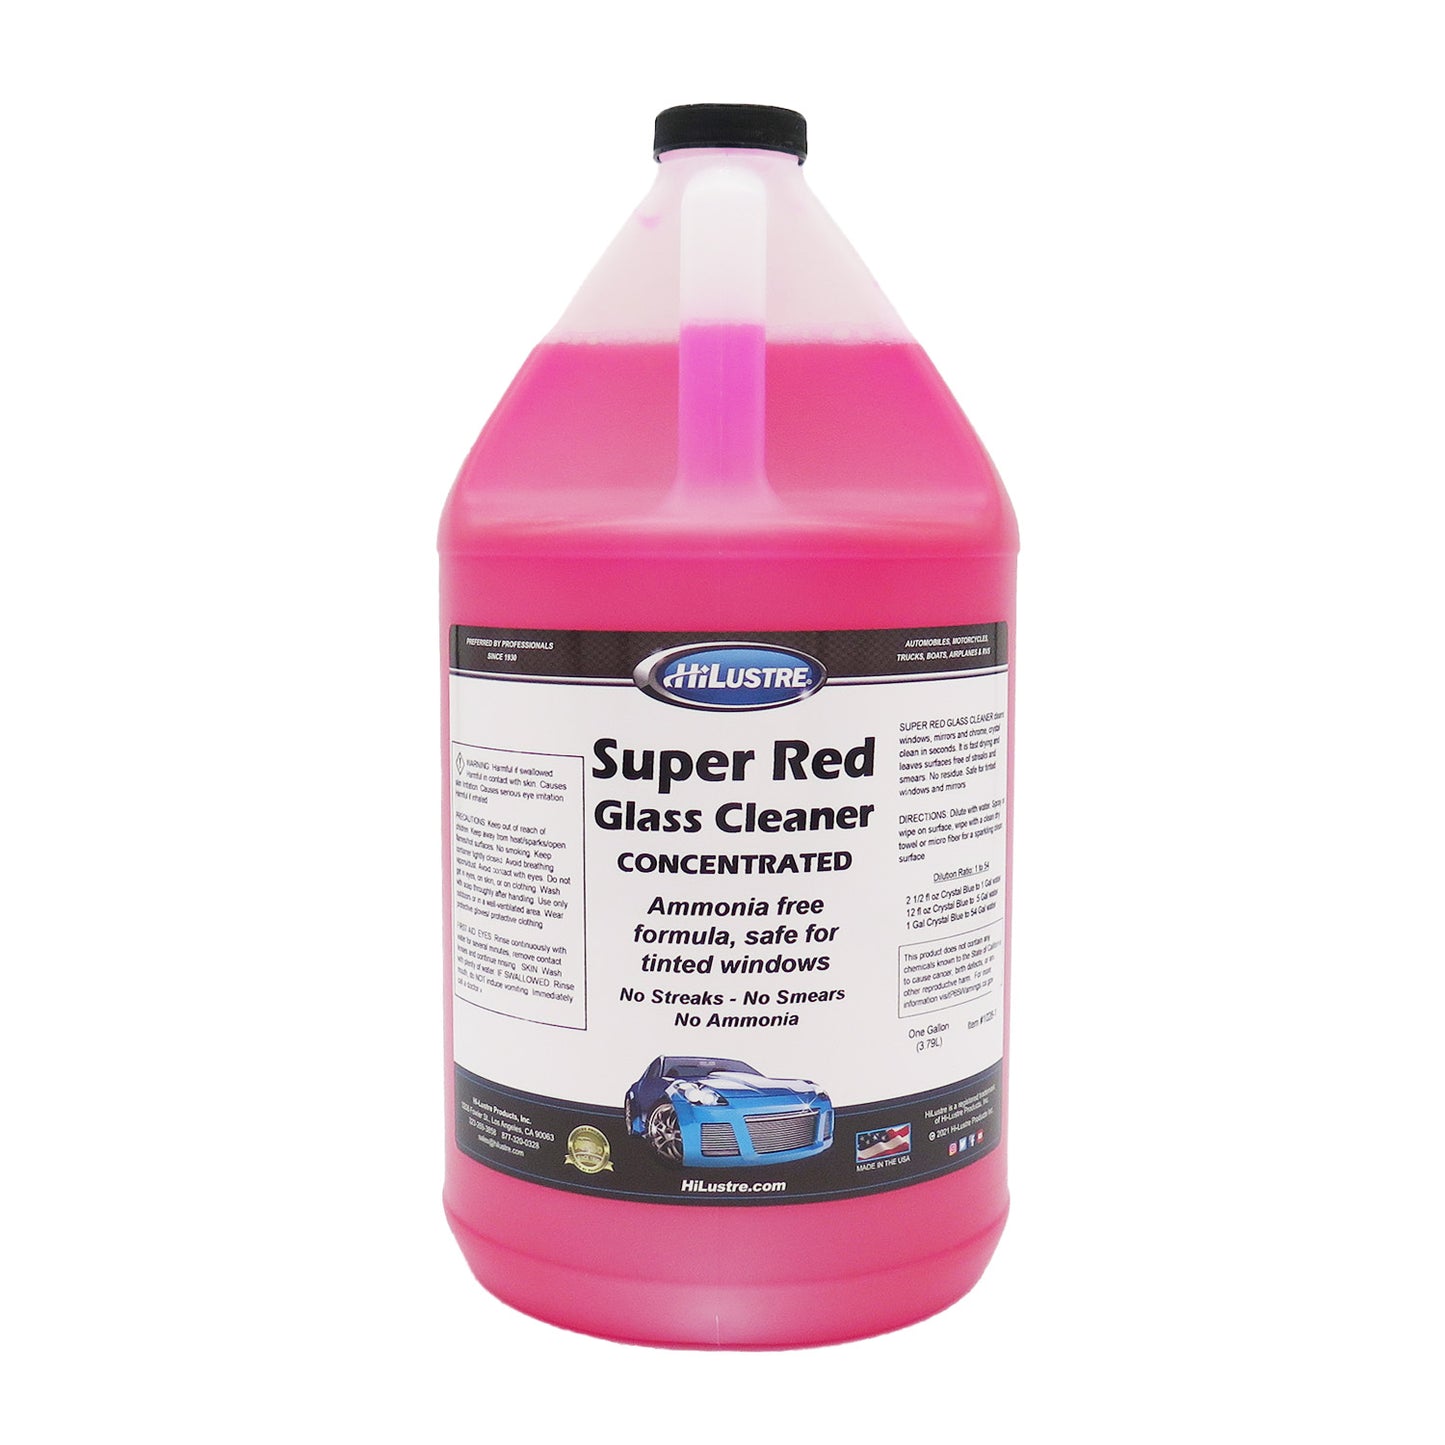 Super Red Glass Cleaner